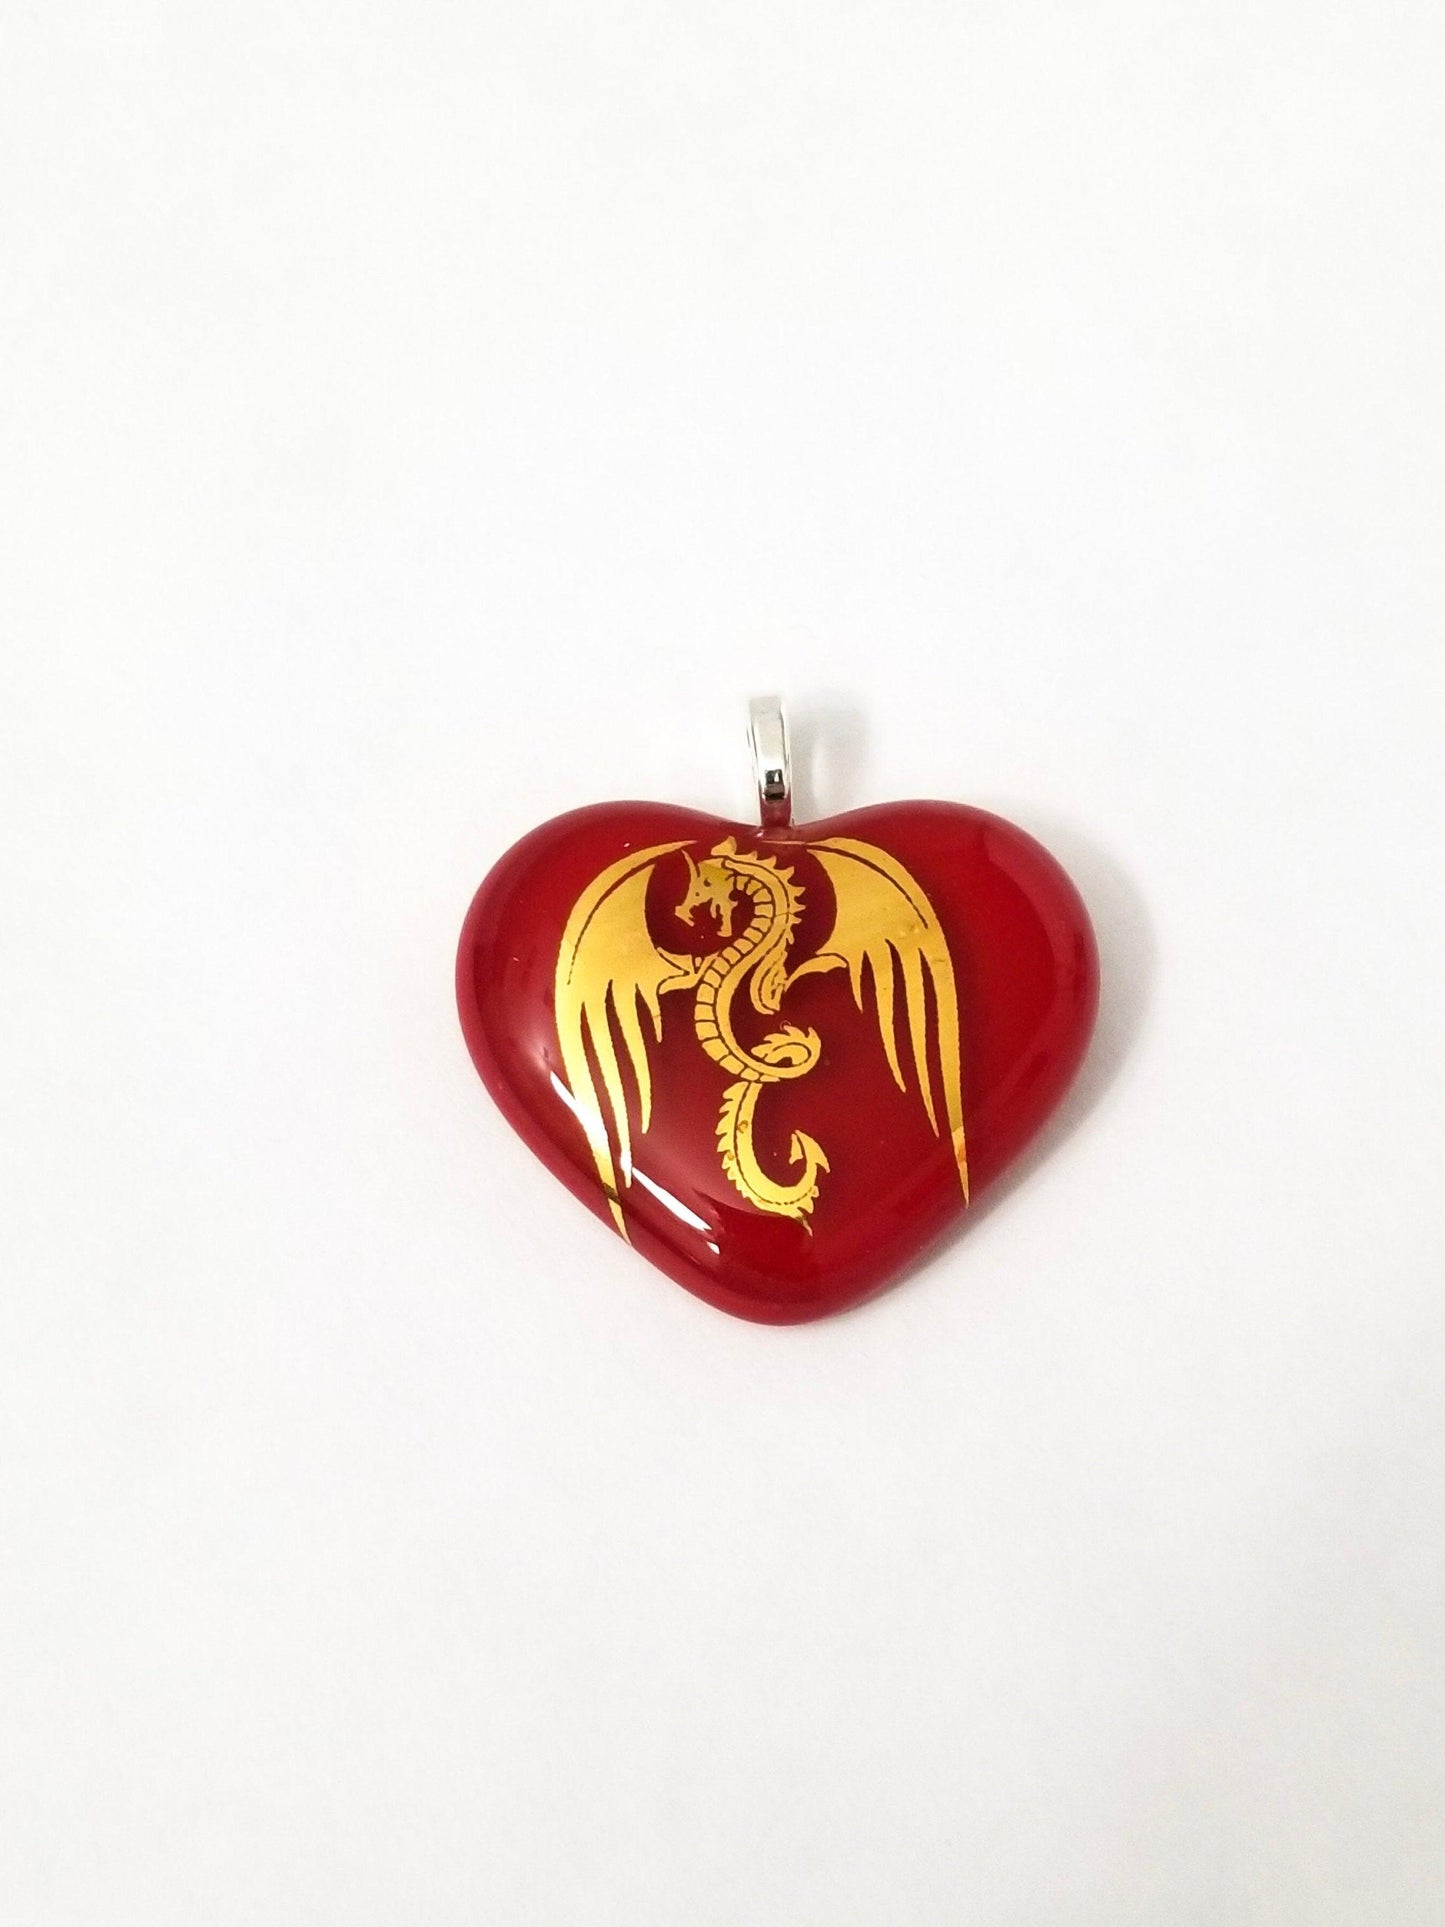 Gold Winged Dragon on Red Heart Fused Glass Pendant from seeds glassworks